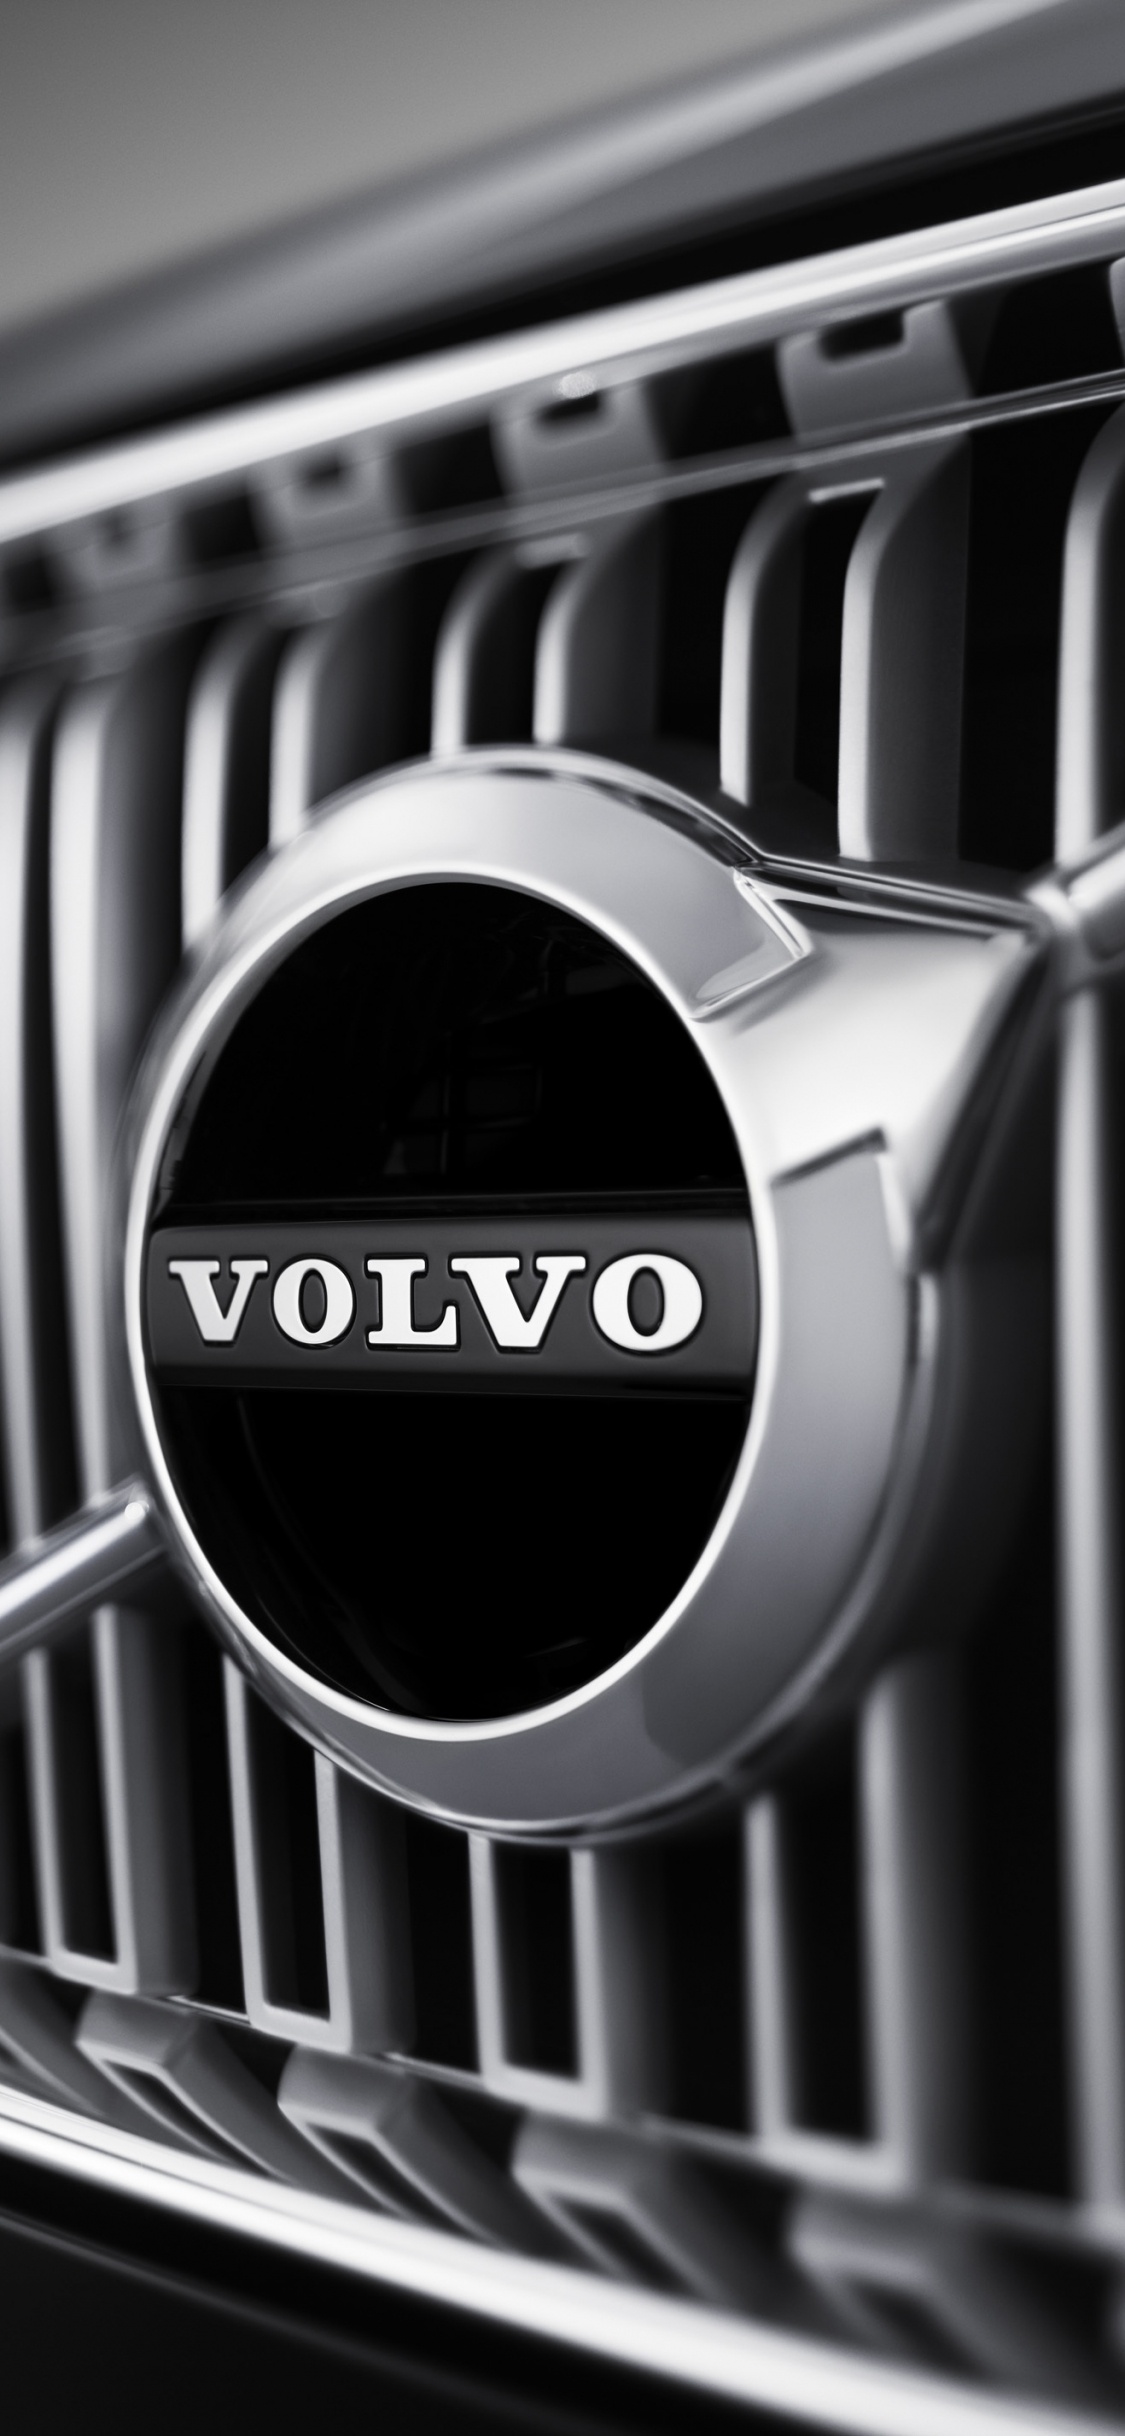 ab Volvo, Volvo Cars, Car, Grille, Black and White. Wallpaper in 1125x2436 Resolution